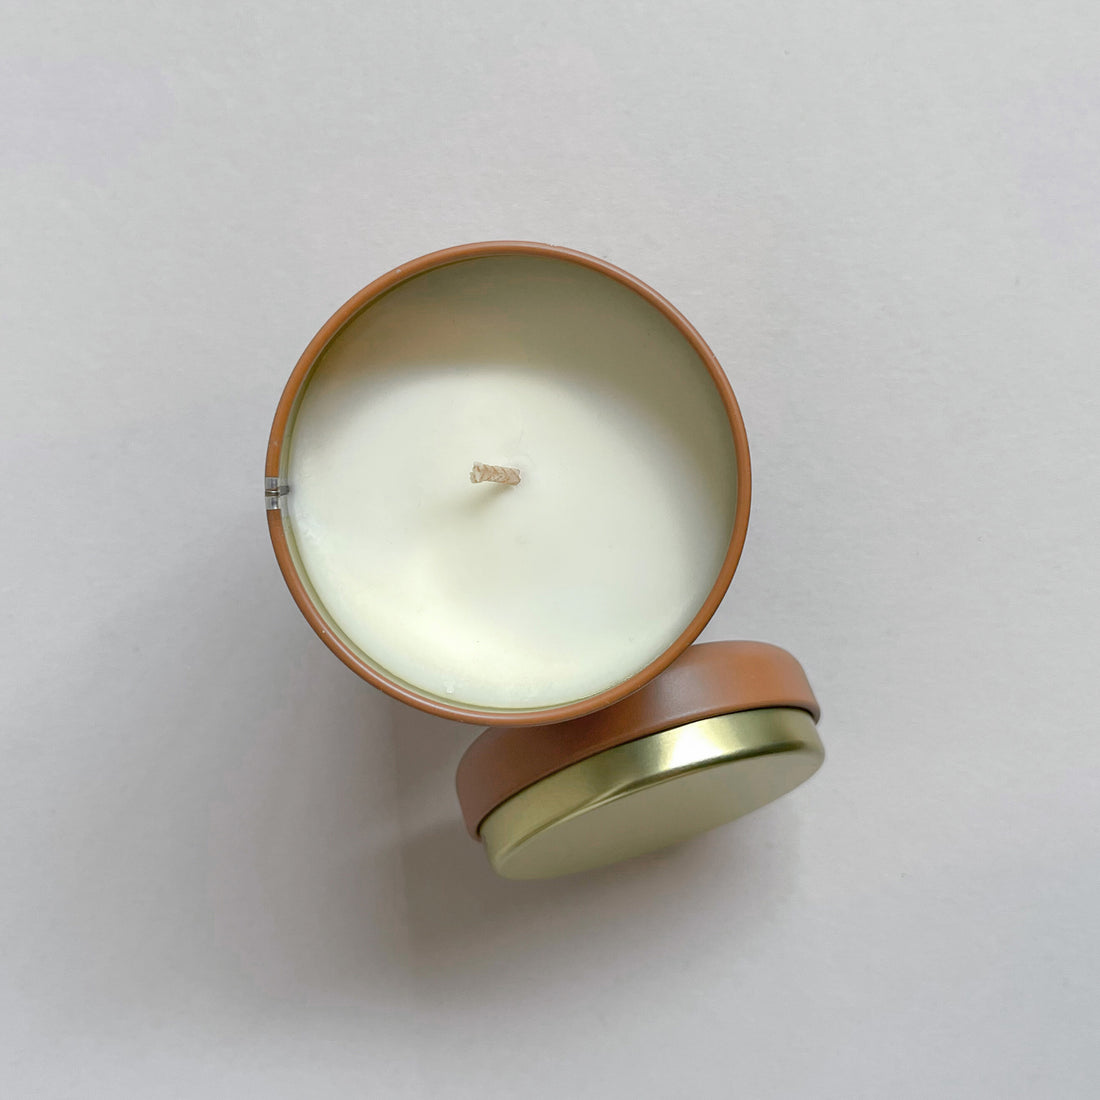 P.F. Candle Co. 10oz Soy Candle - Swell